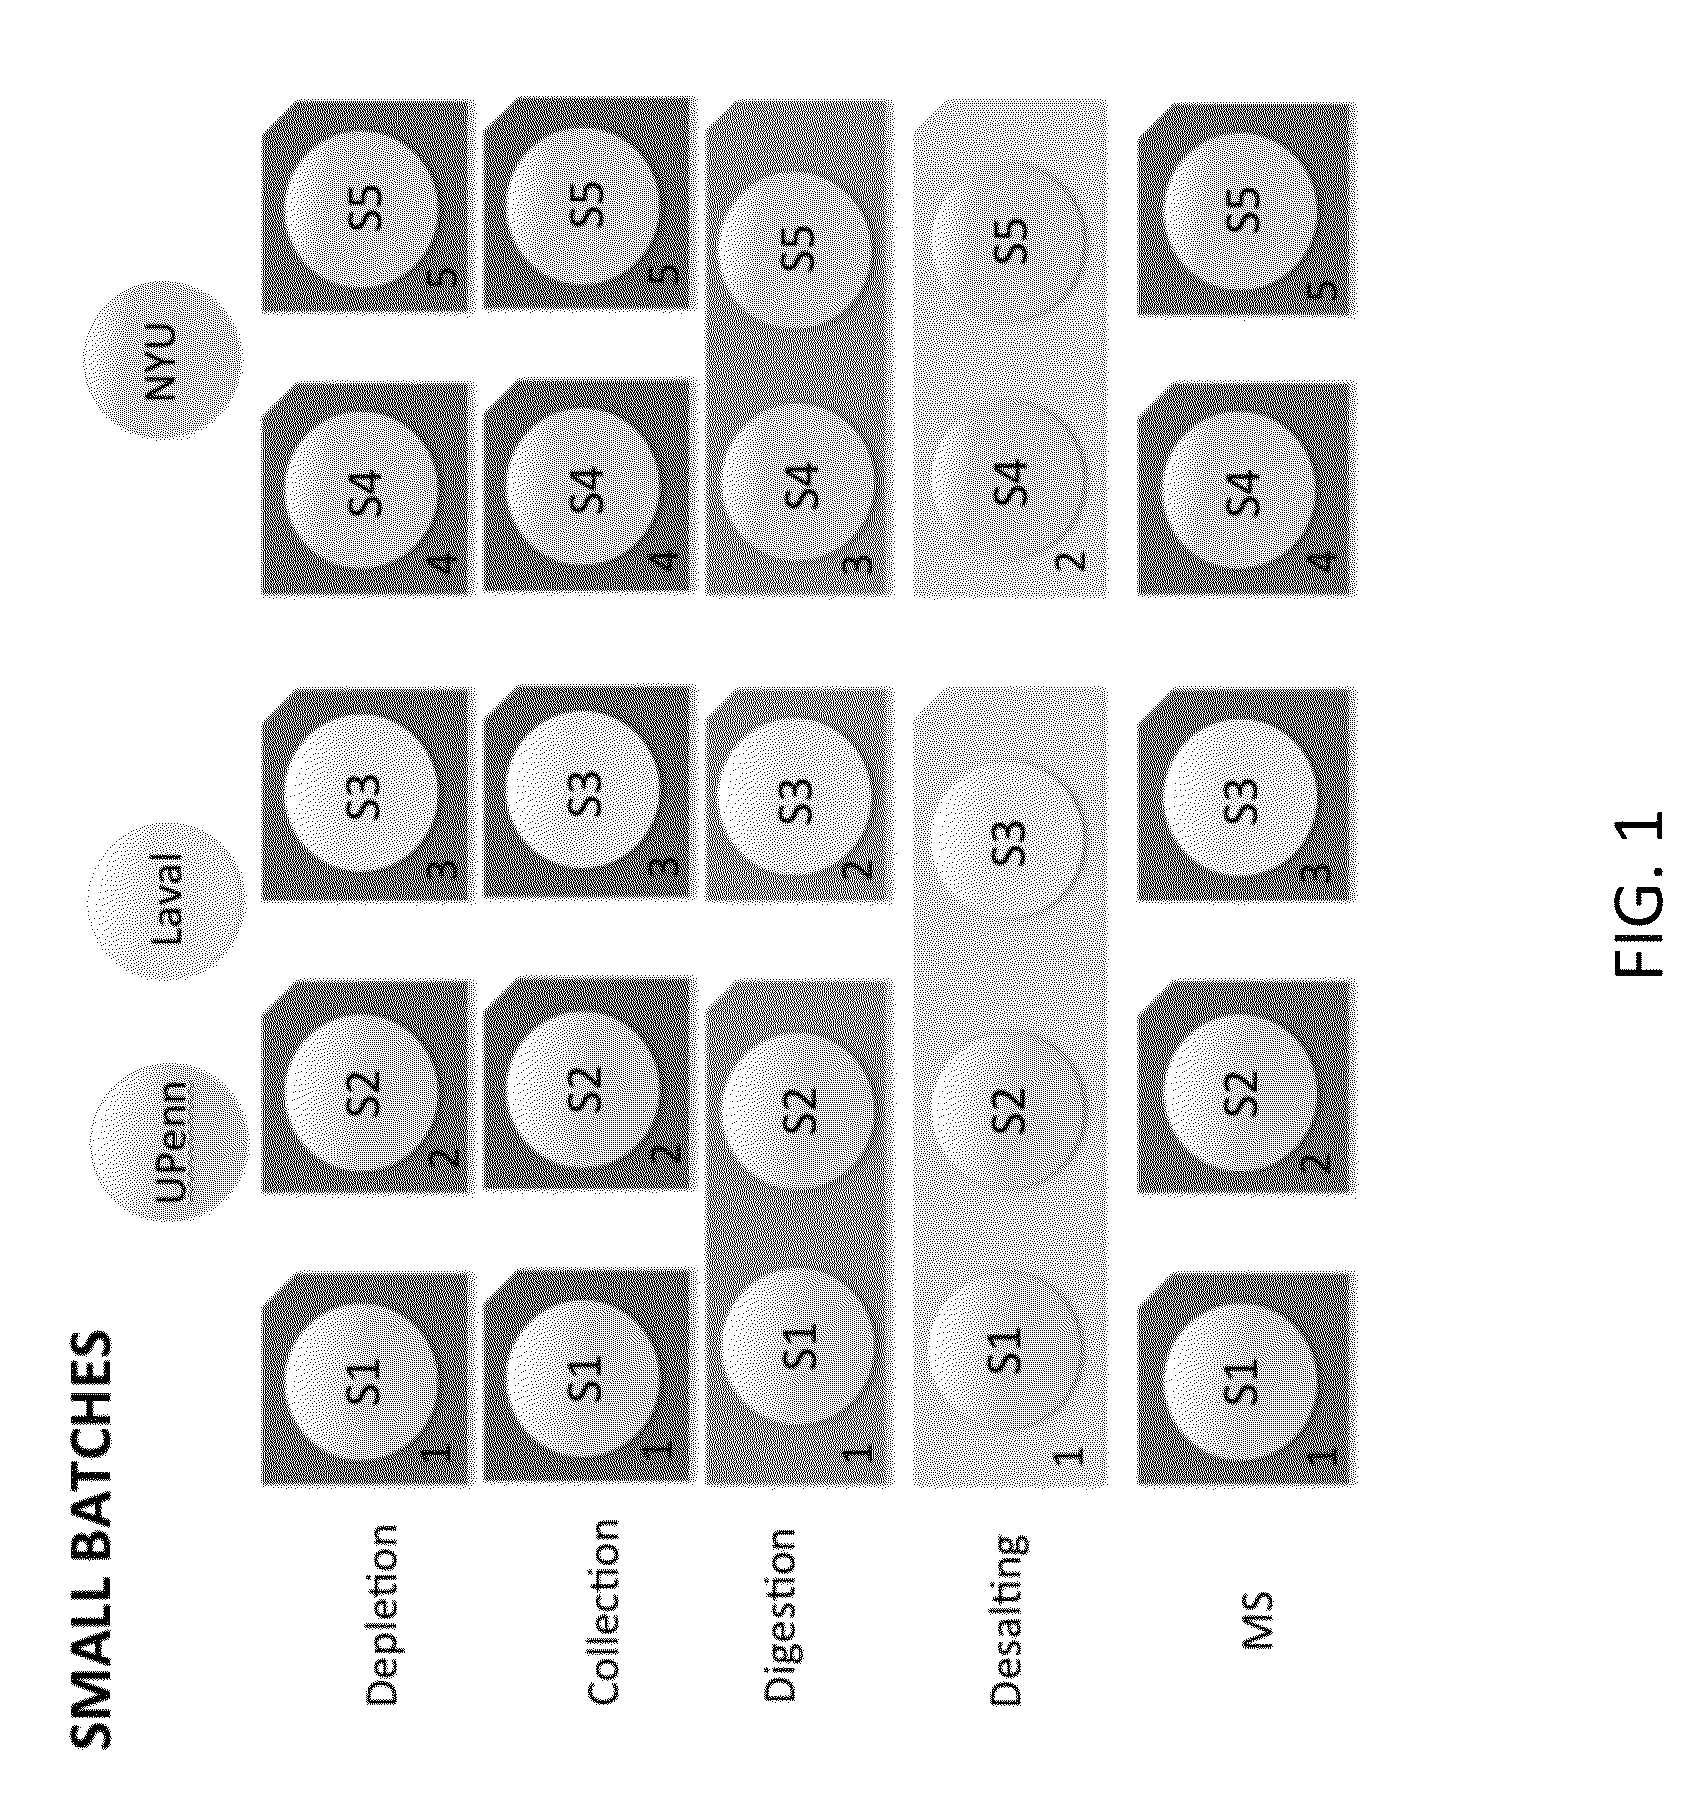 Compositions, methods and kits for diagnosis of lung cancer